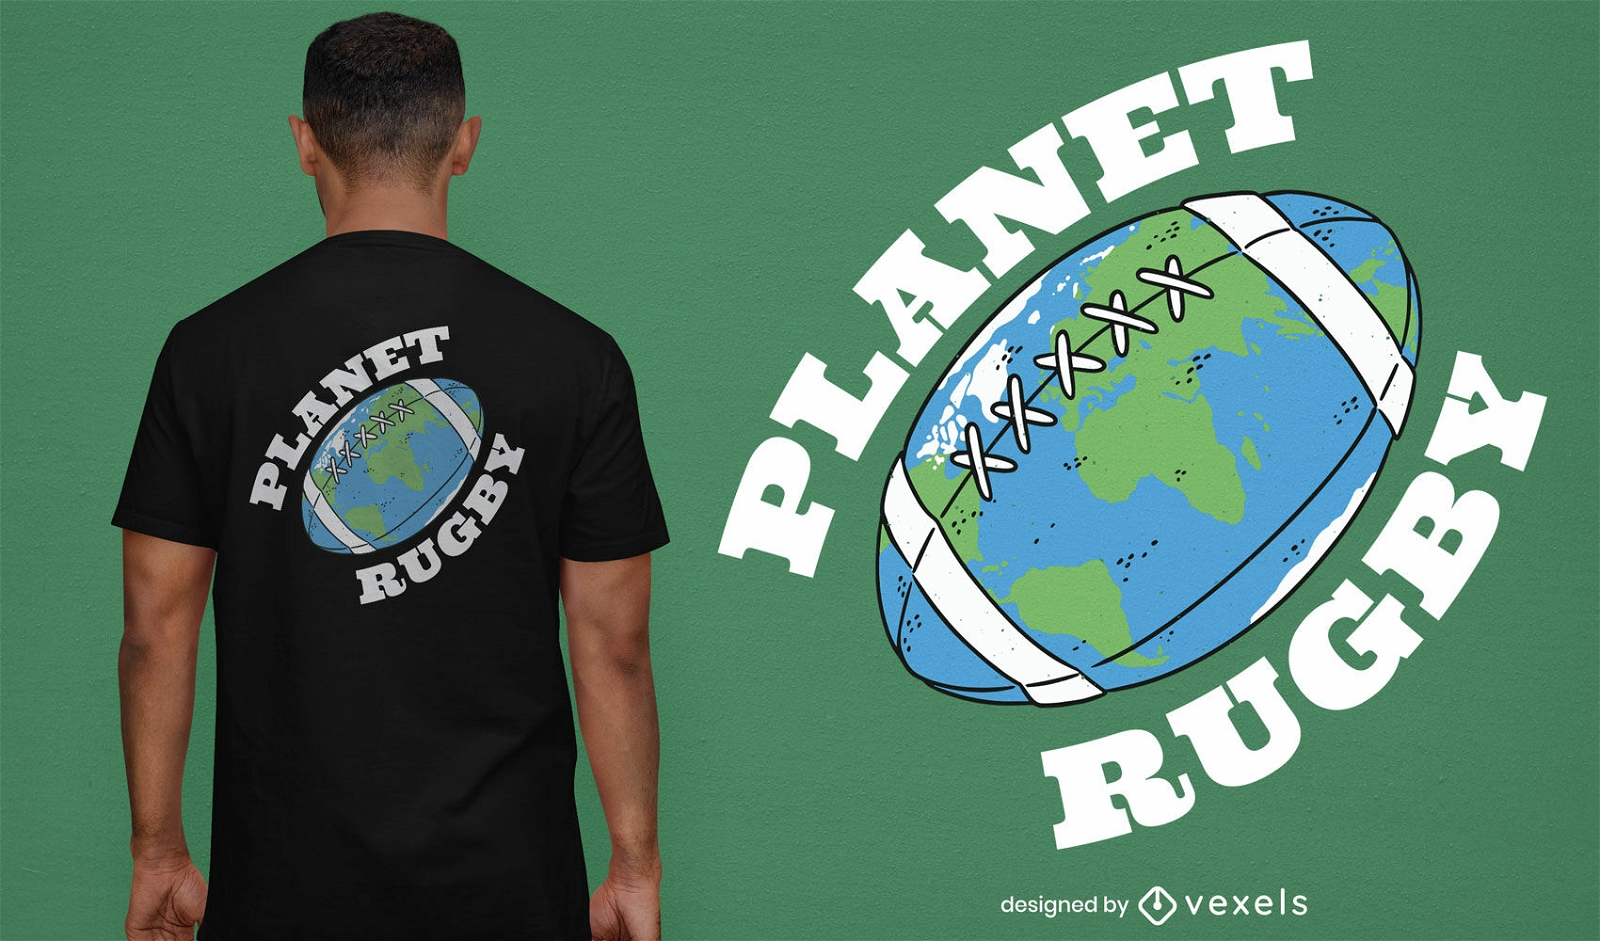 Planet rugby t-shirt design